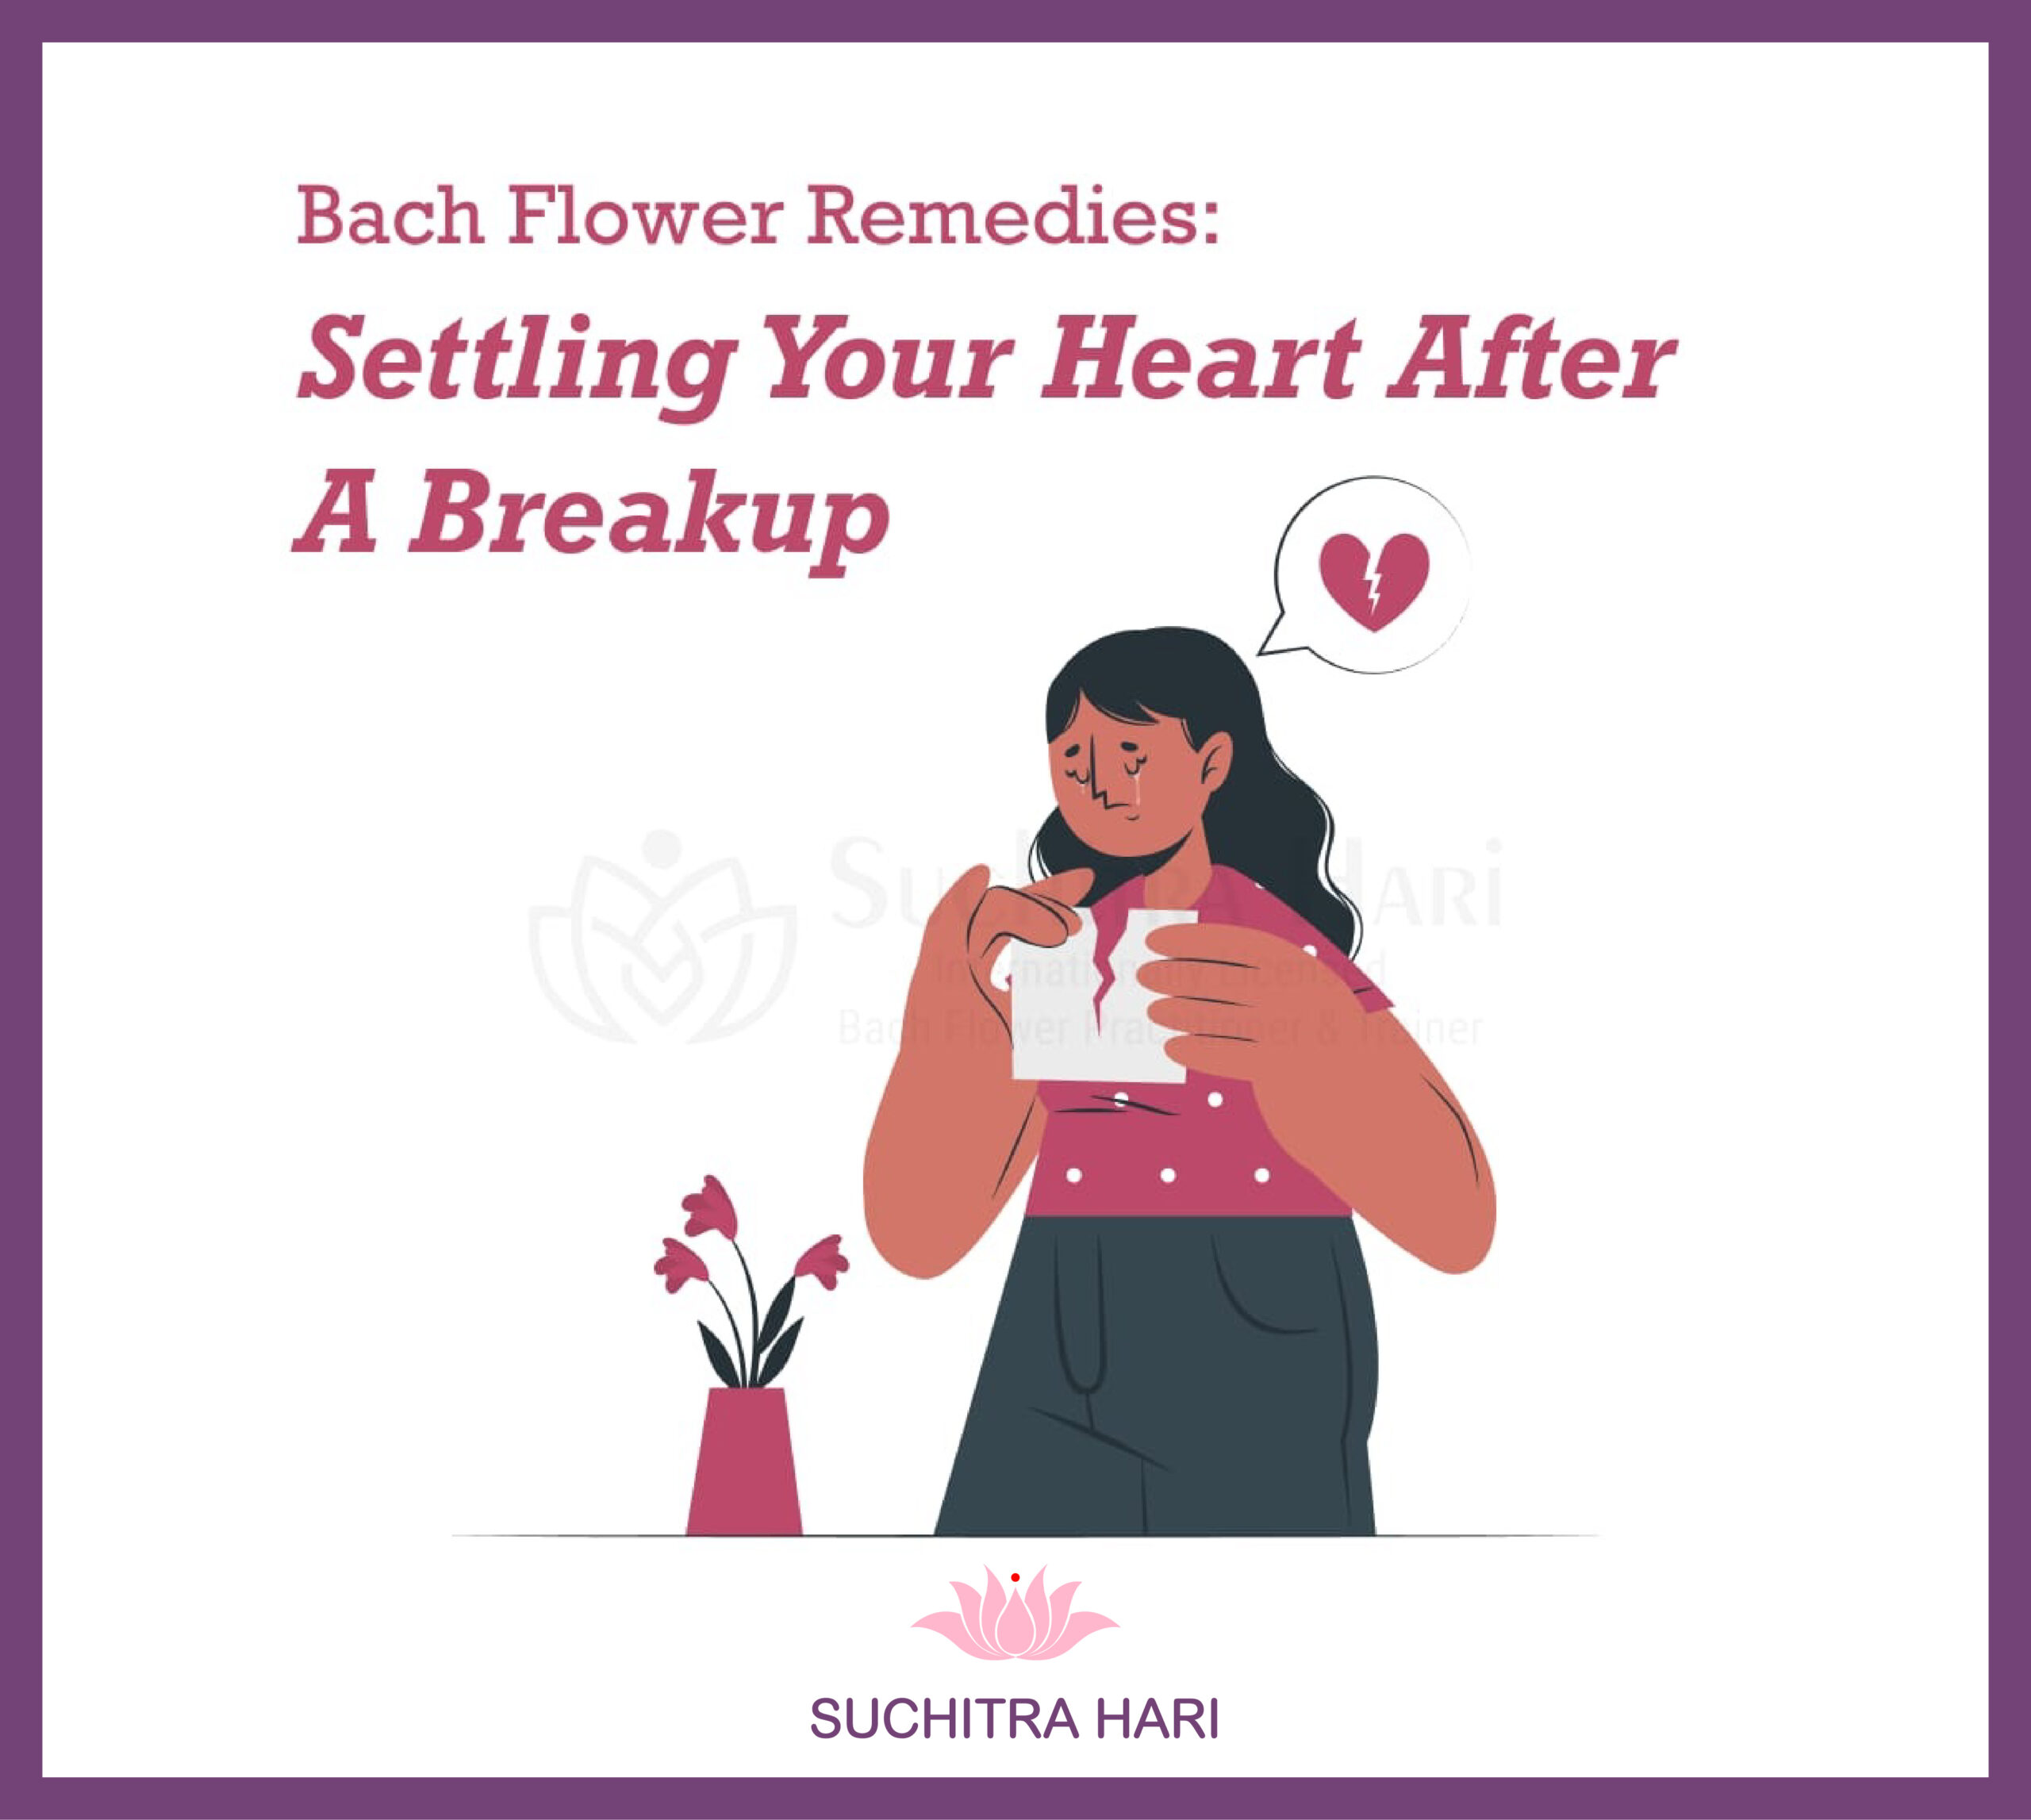 Bach Flower Remedies: Settling Your Heart After A Breakup